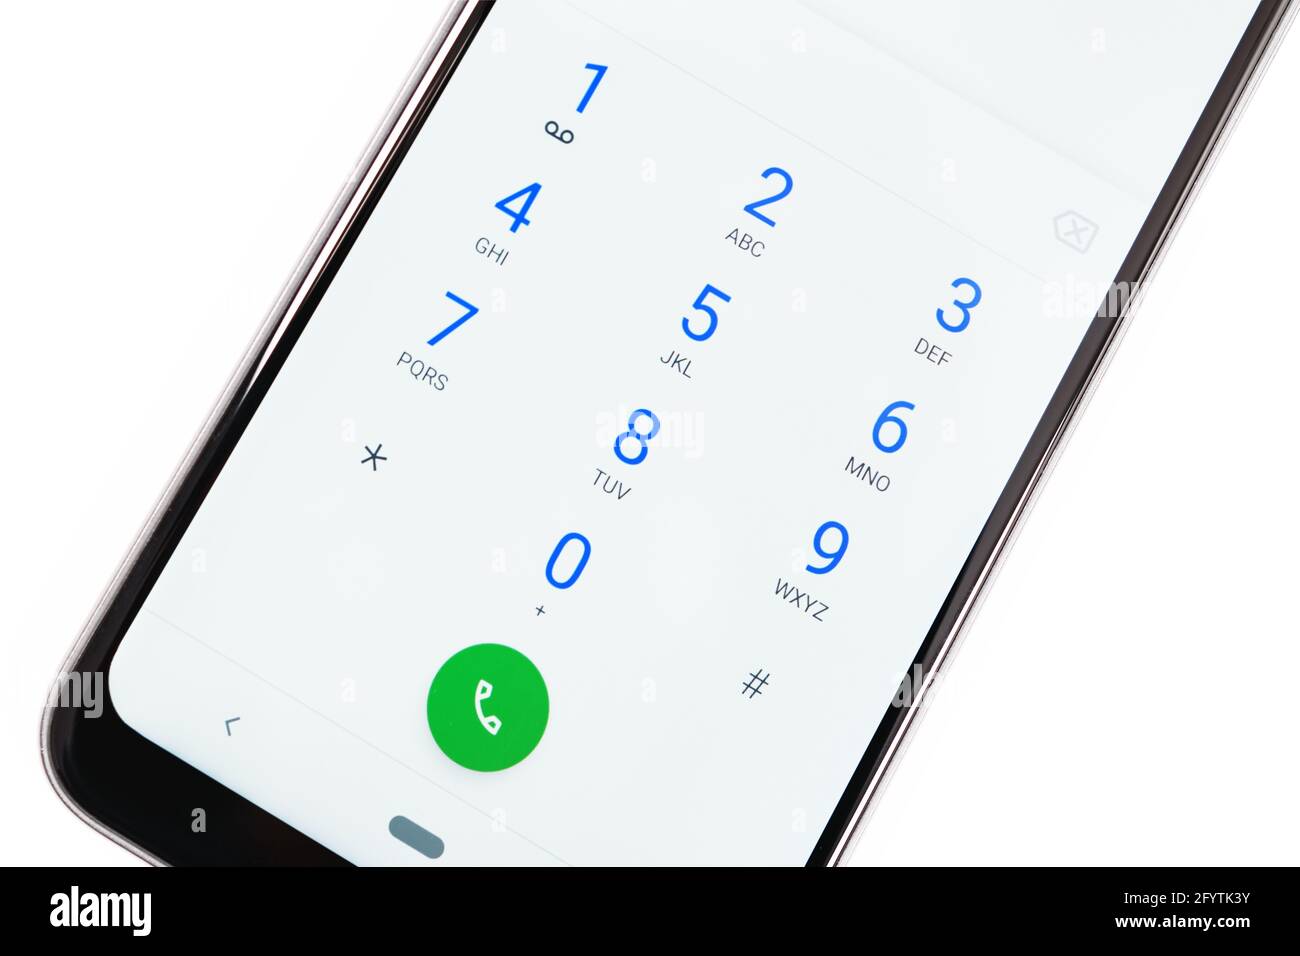 Modern smartphone screen with numbers dialing keypad in close-up on a white background Stock Photo